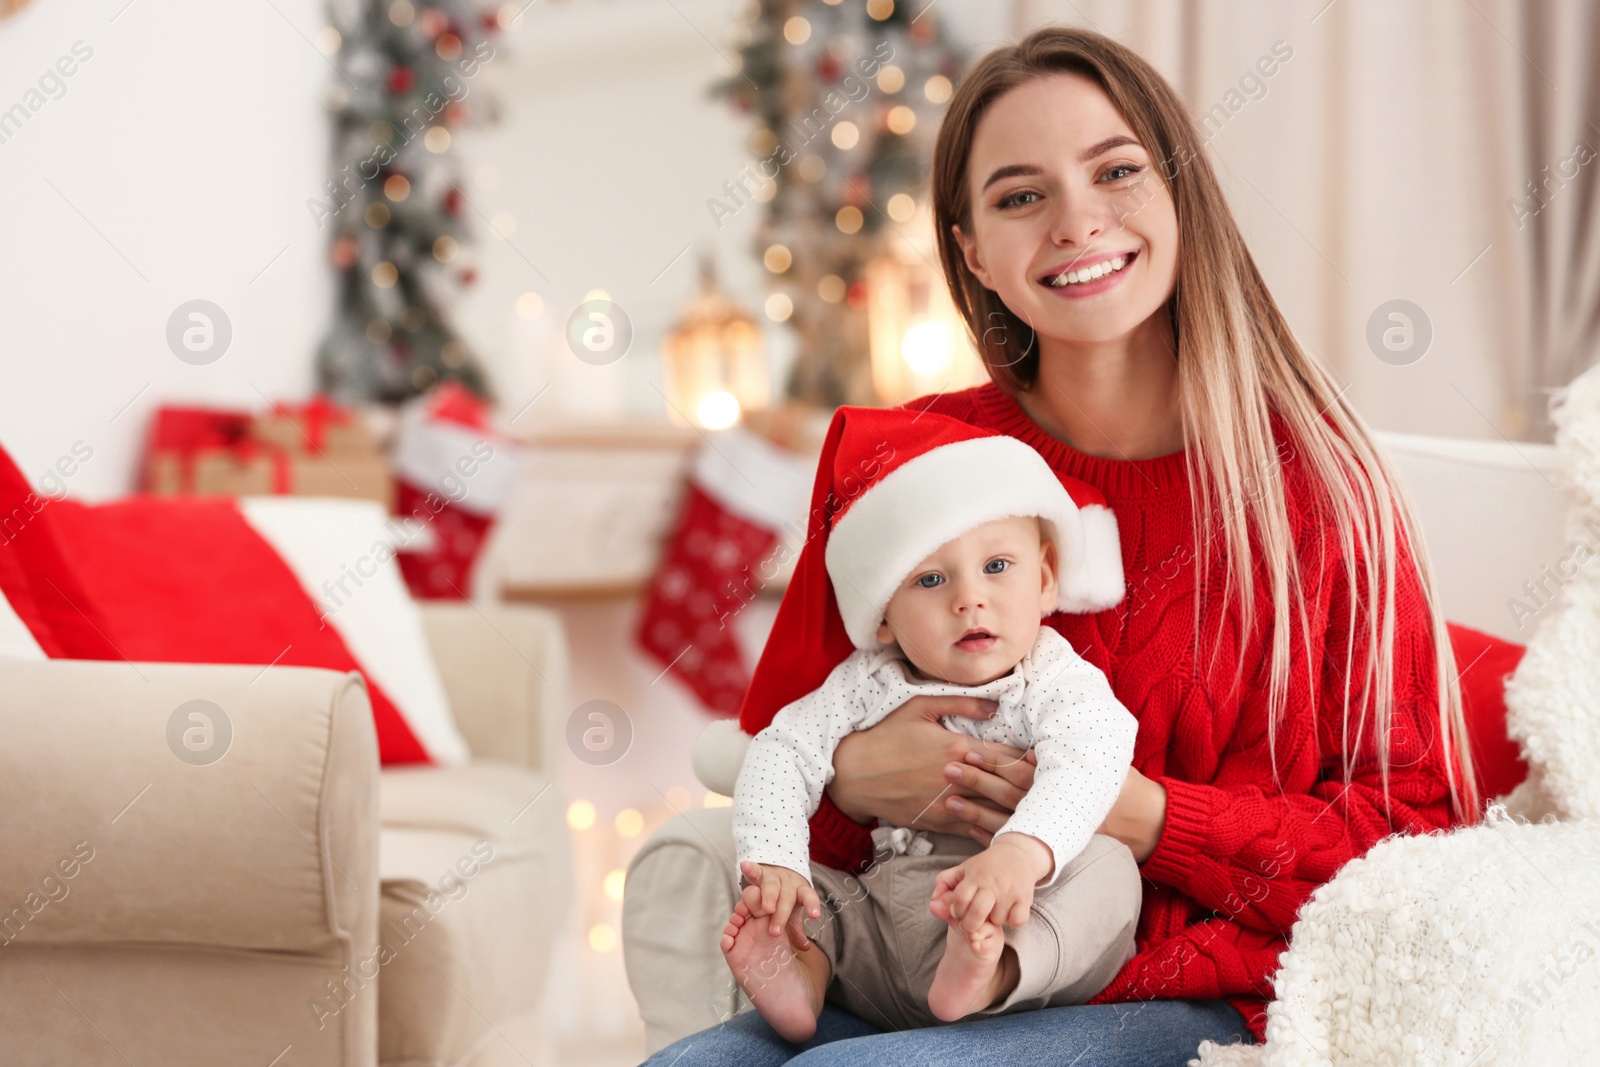 Photo of Happy mother with cute baby in room decorated for Christmas holiday